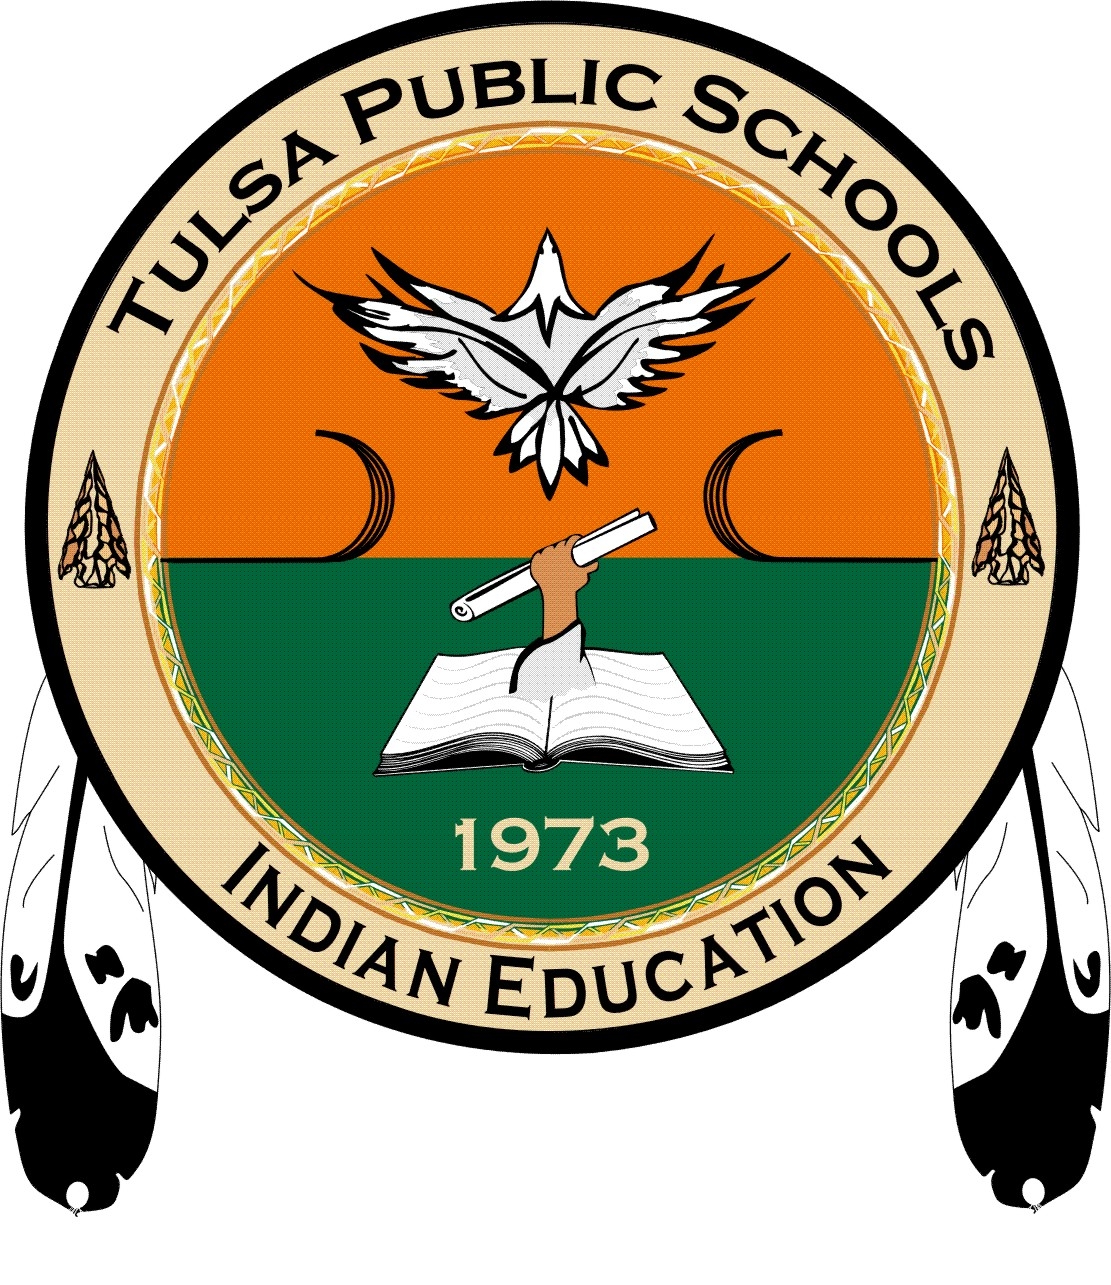 The official seal of Indian Education at Tulsa Public Schools